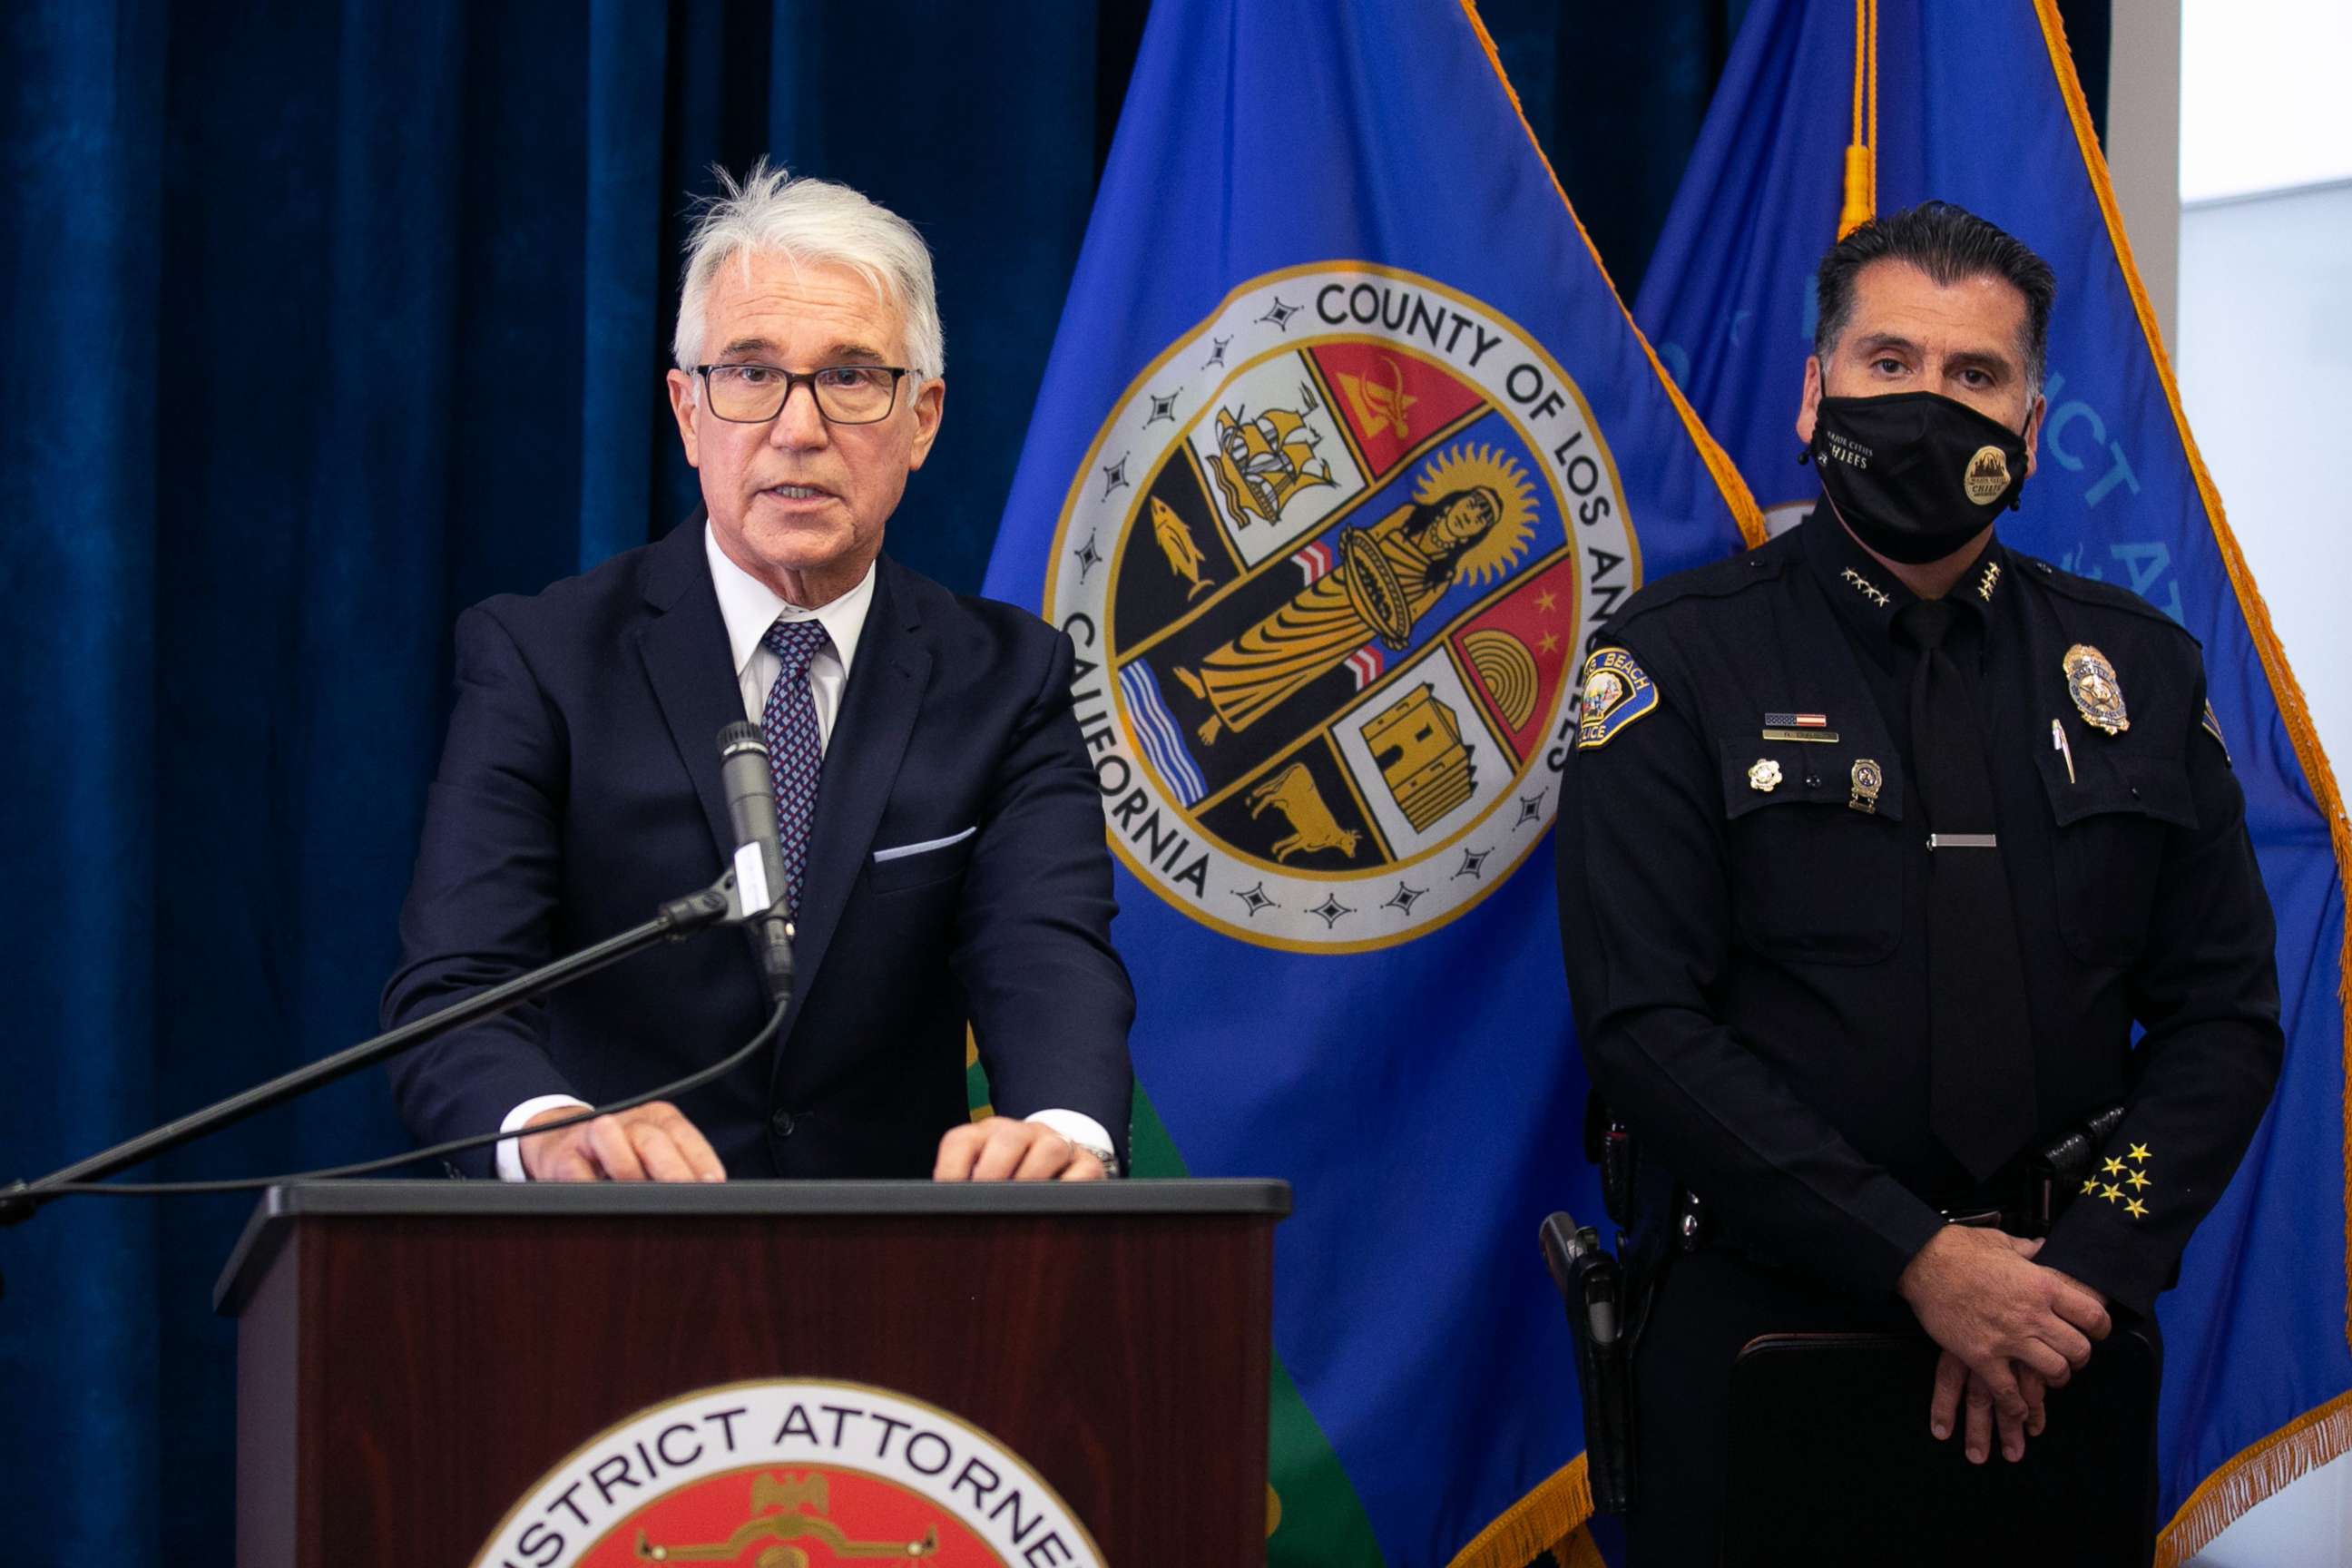 PHOTO: Los Angeles County District Attorney George Gascon, along with Long Beach Police Chief Robert G. Luna, announce the Long Beach school safety officer, Eddie F. Gonzalez, has been arrested and charged with murder, Oct. 27, 2021 in Los Angeles.